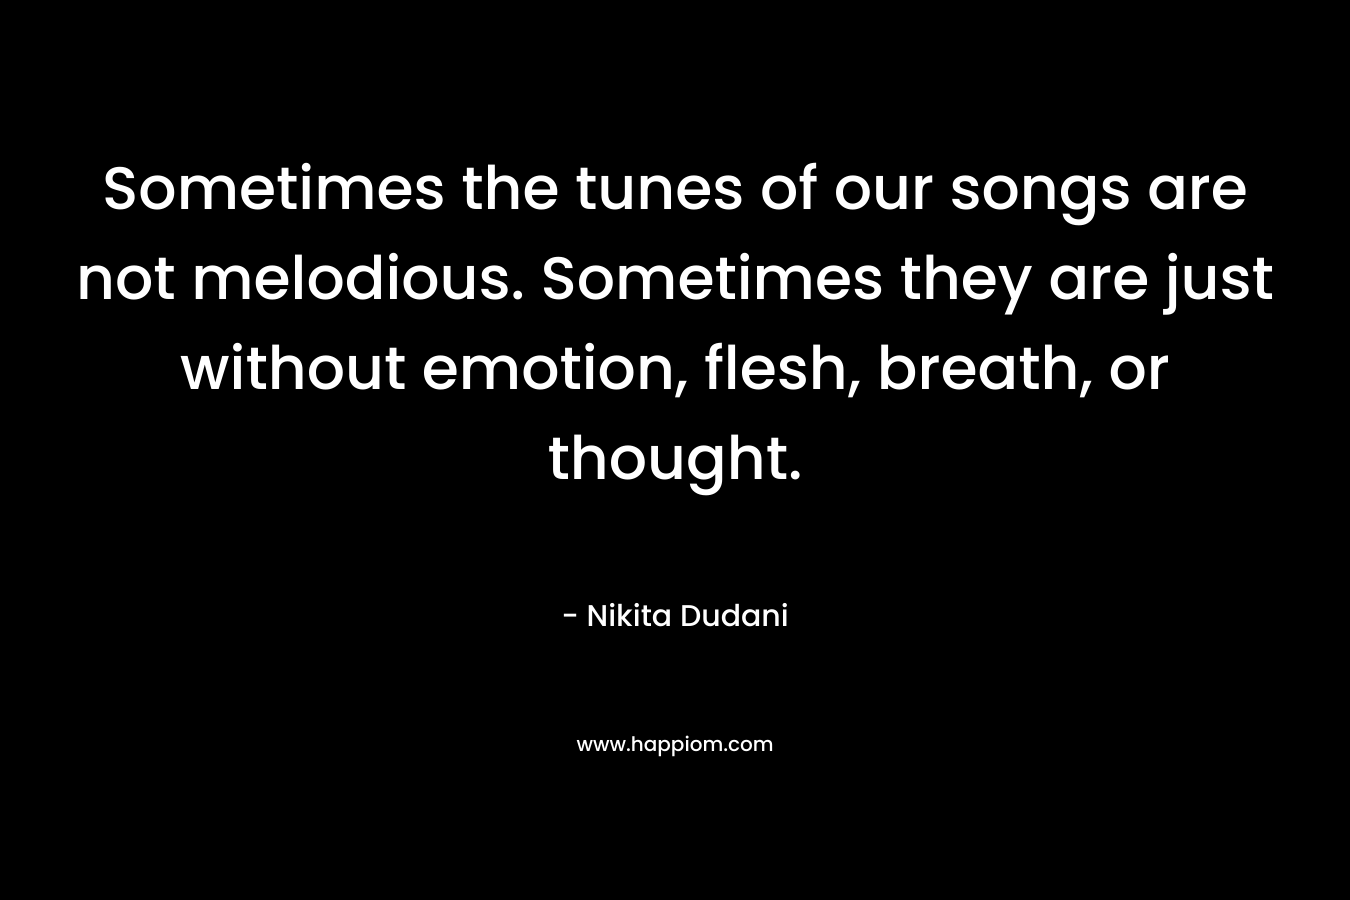 Sometimes the tunes of our songs are not melodious. Sometimes they are just without emotion, flesh, breath, or thought. – Nikita Dudani